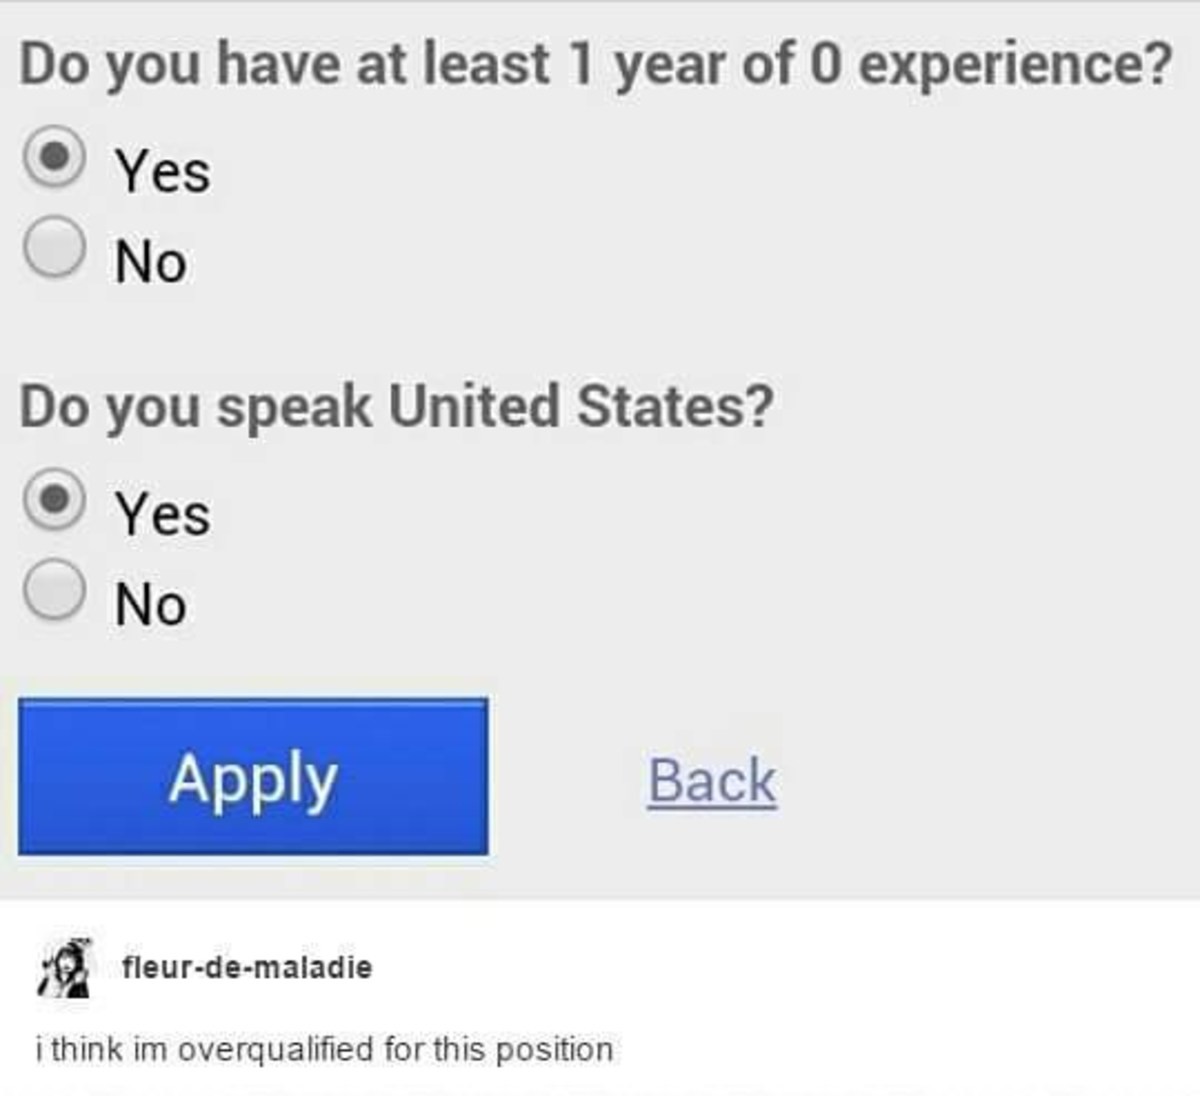 Hired. . Do you have at least I year of experience? iii) Yes Do you speak United States? Ci) Yes C) talo Back tilf ithink overqualified forms position